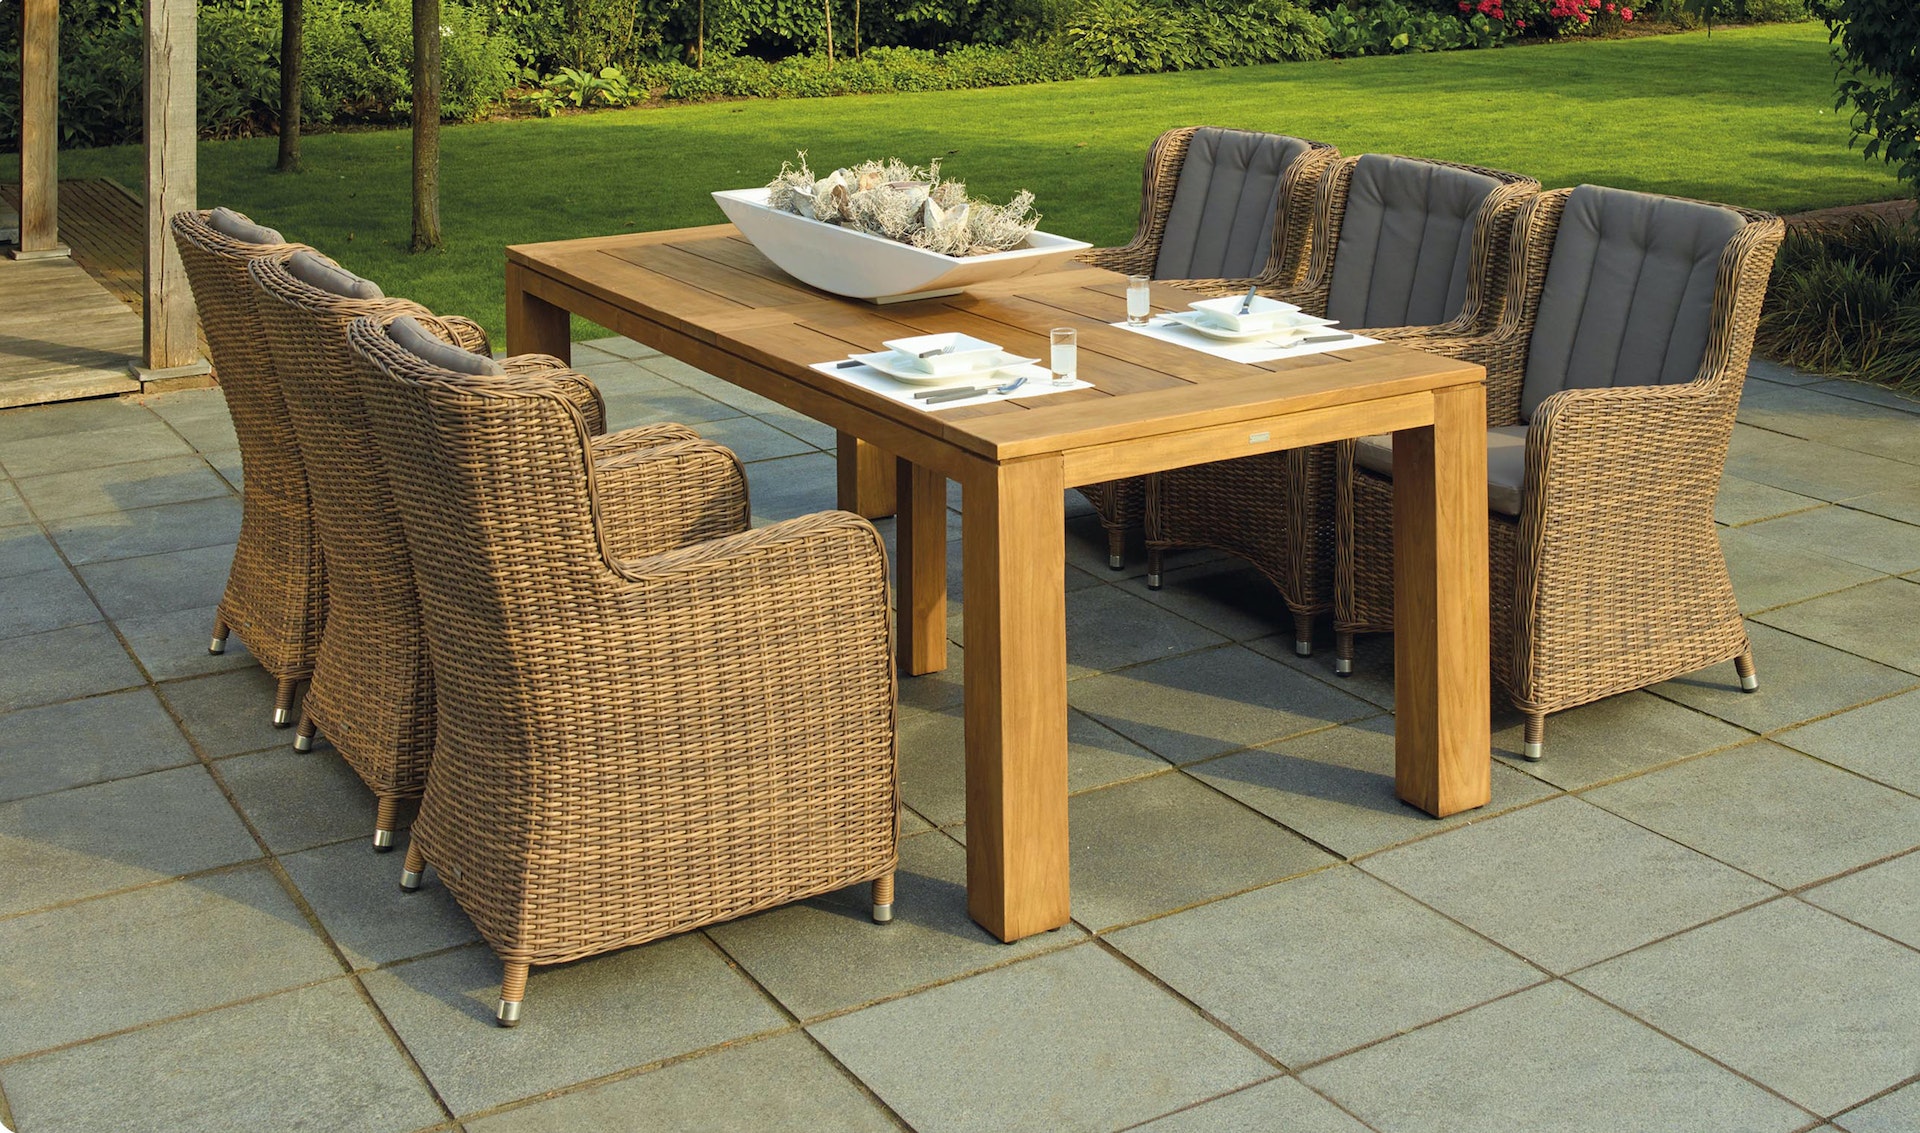 Tips on How to Choose the Best Outdoor Furniture for Your Garden